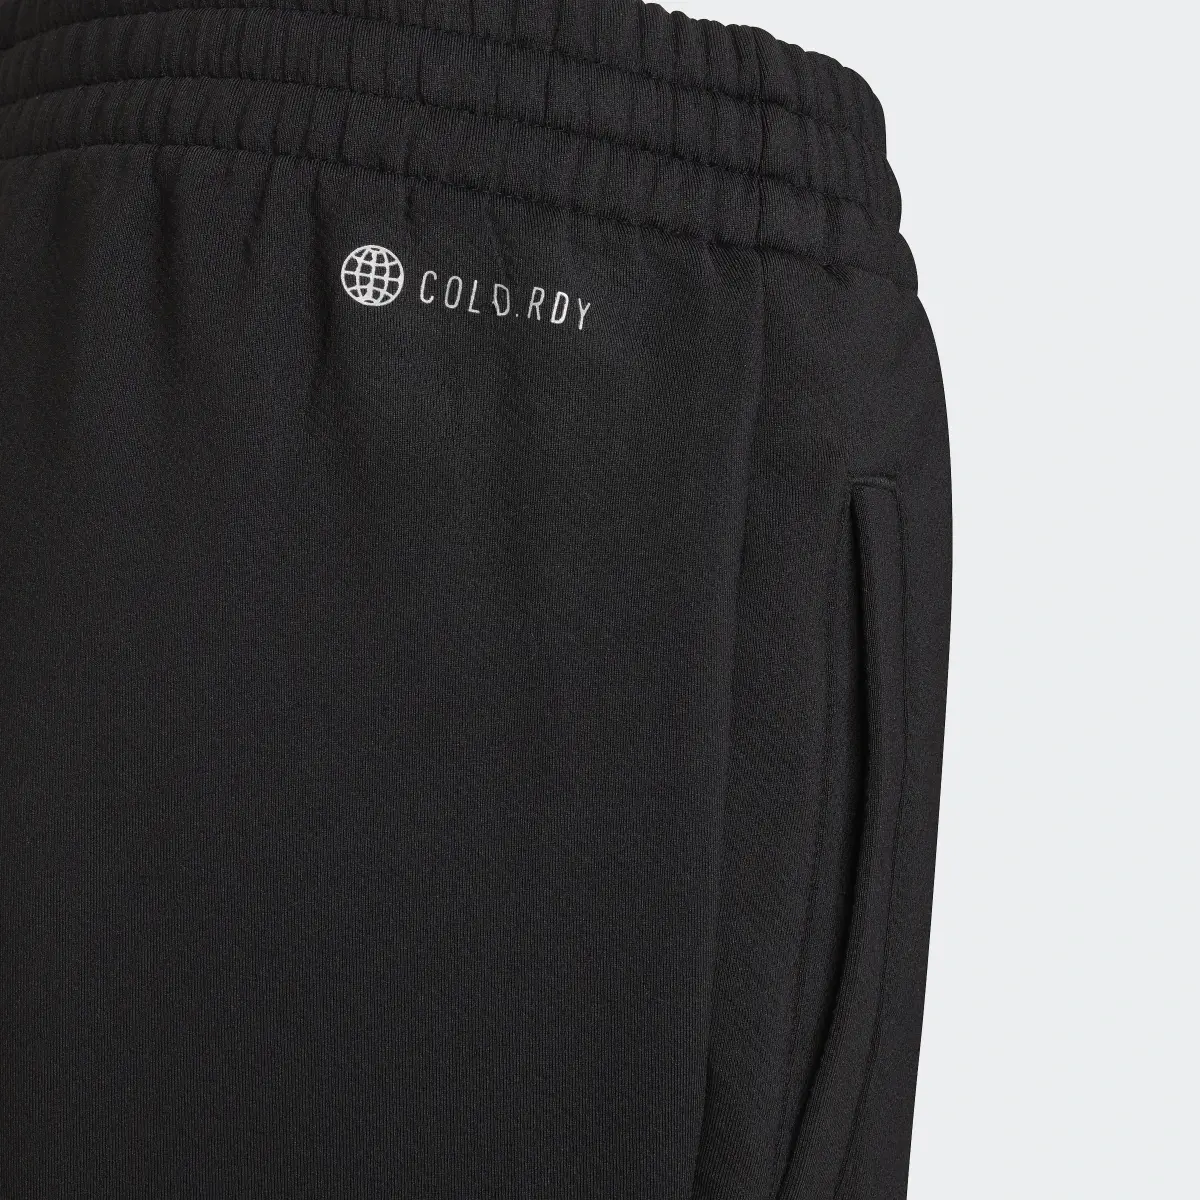 Adidas COLD.RDY Sport Icons Training Joggers. 3